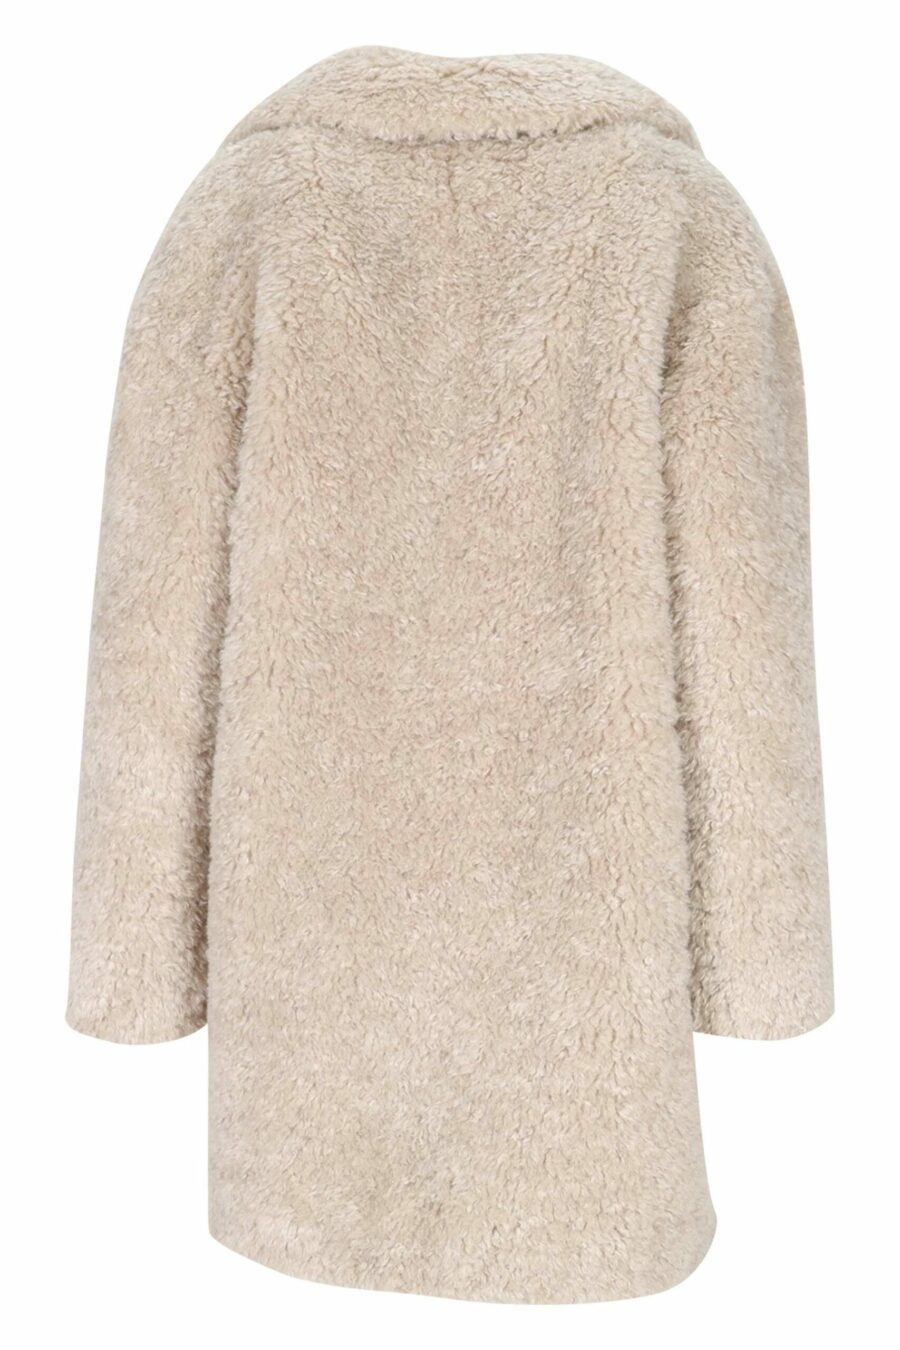 White curly faux fur coat with printed inner lining - 8055721641478 2 scaled